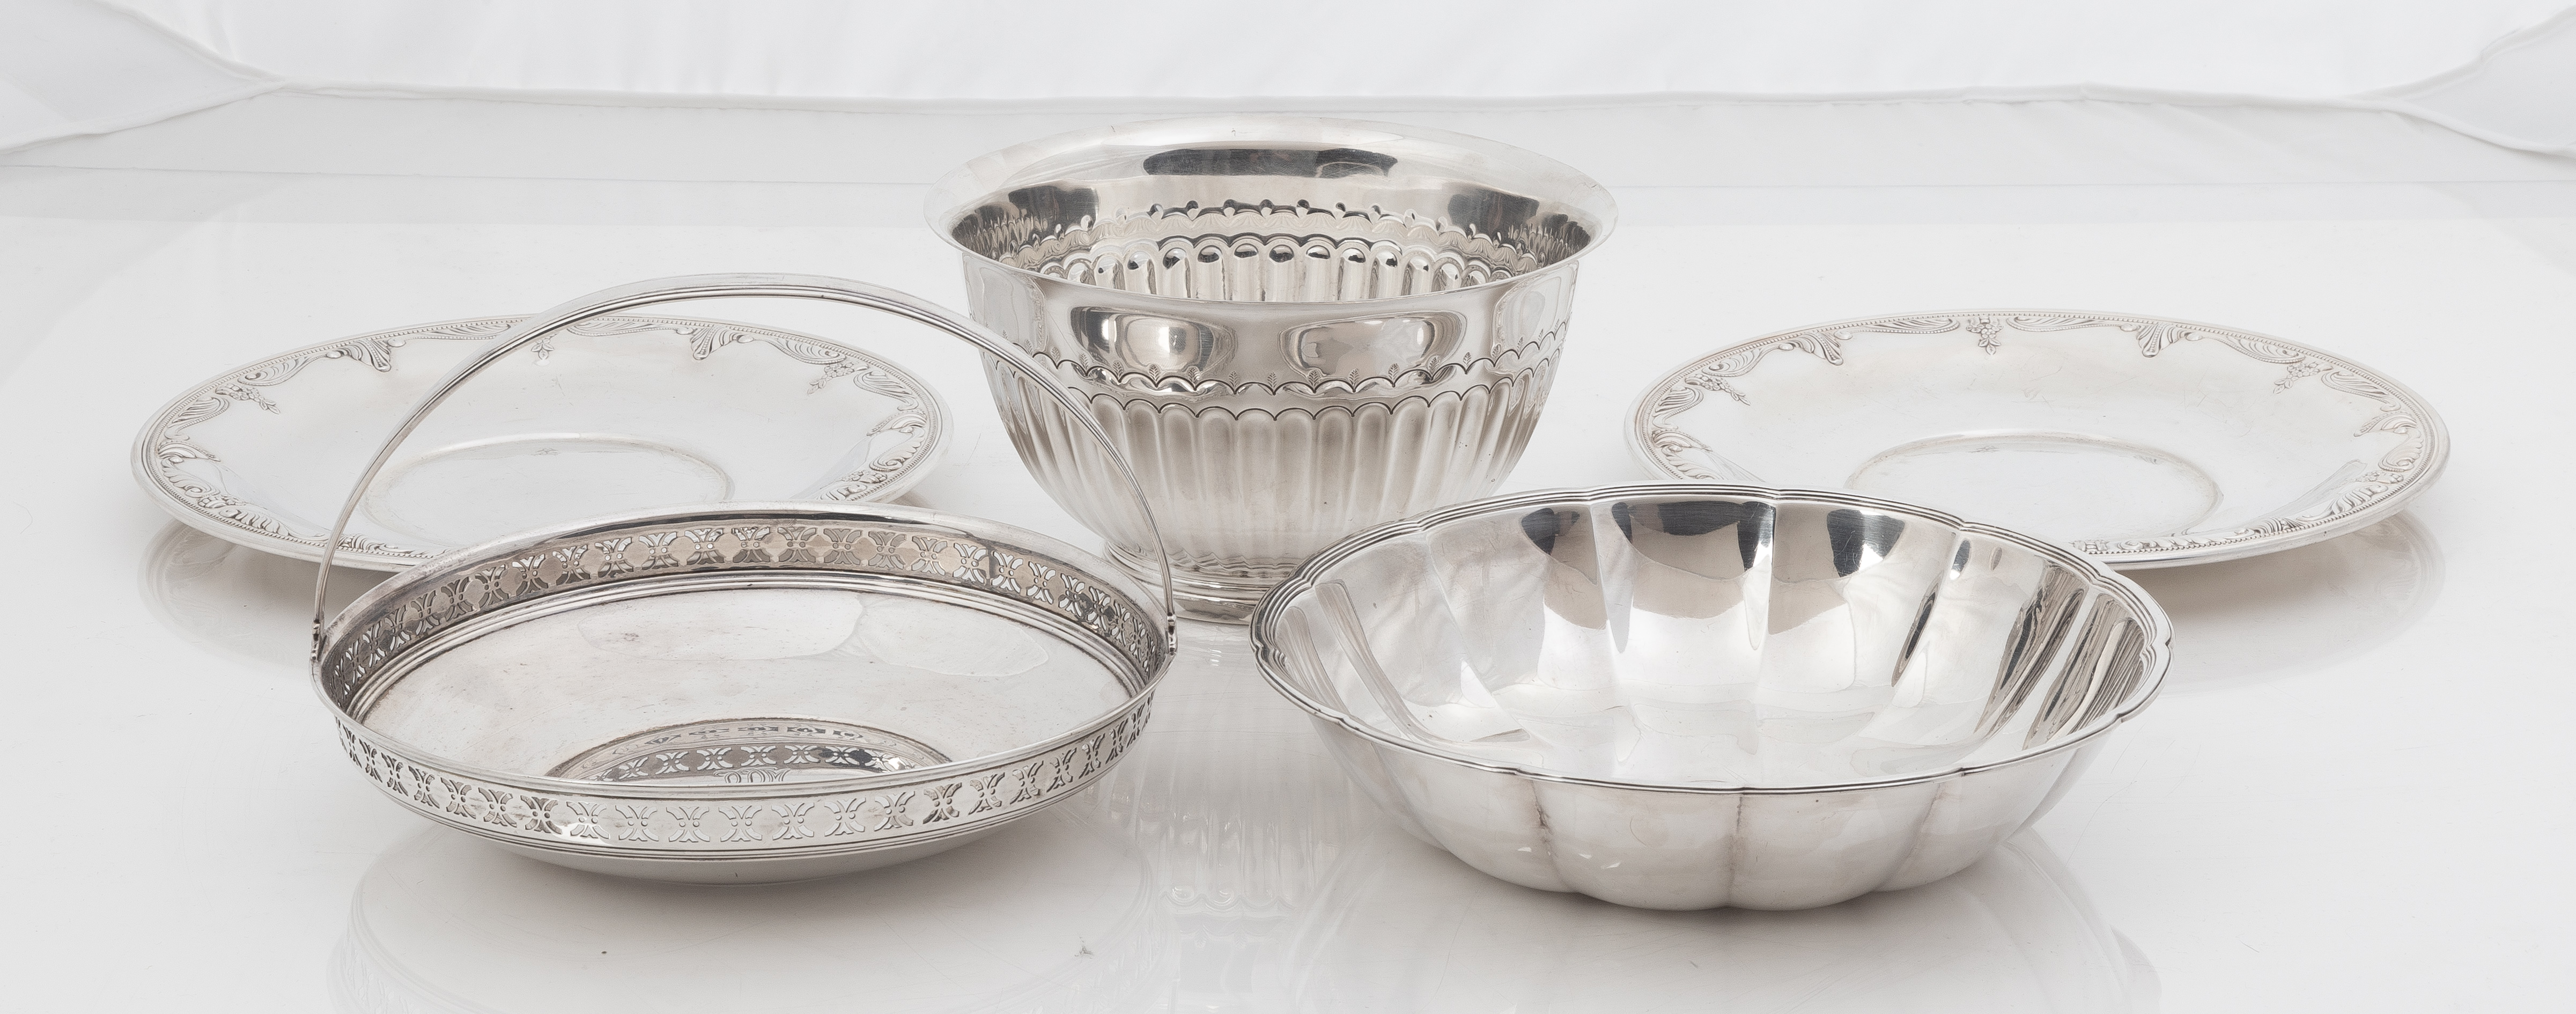 GROUP OF STERLING SILVER BOWLS 3c7f66